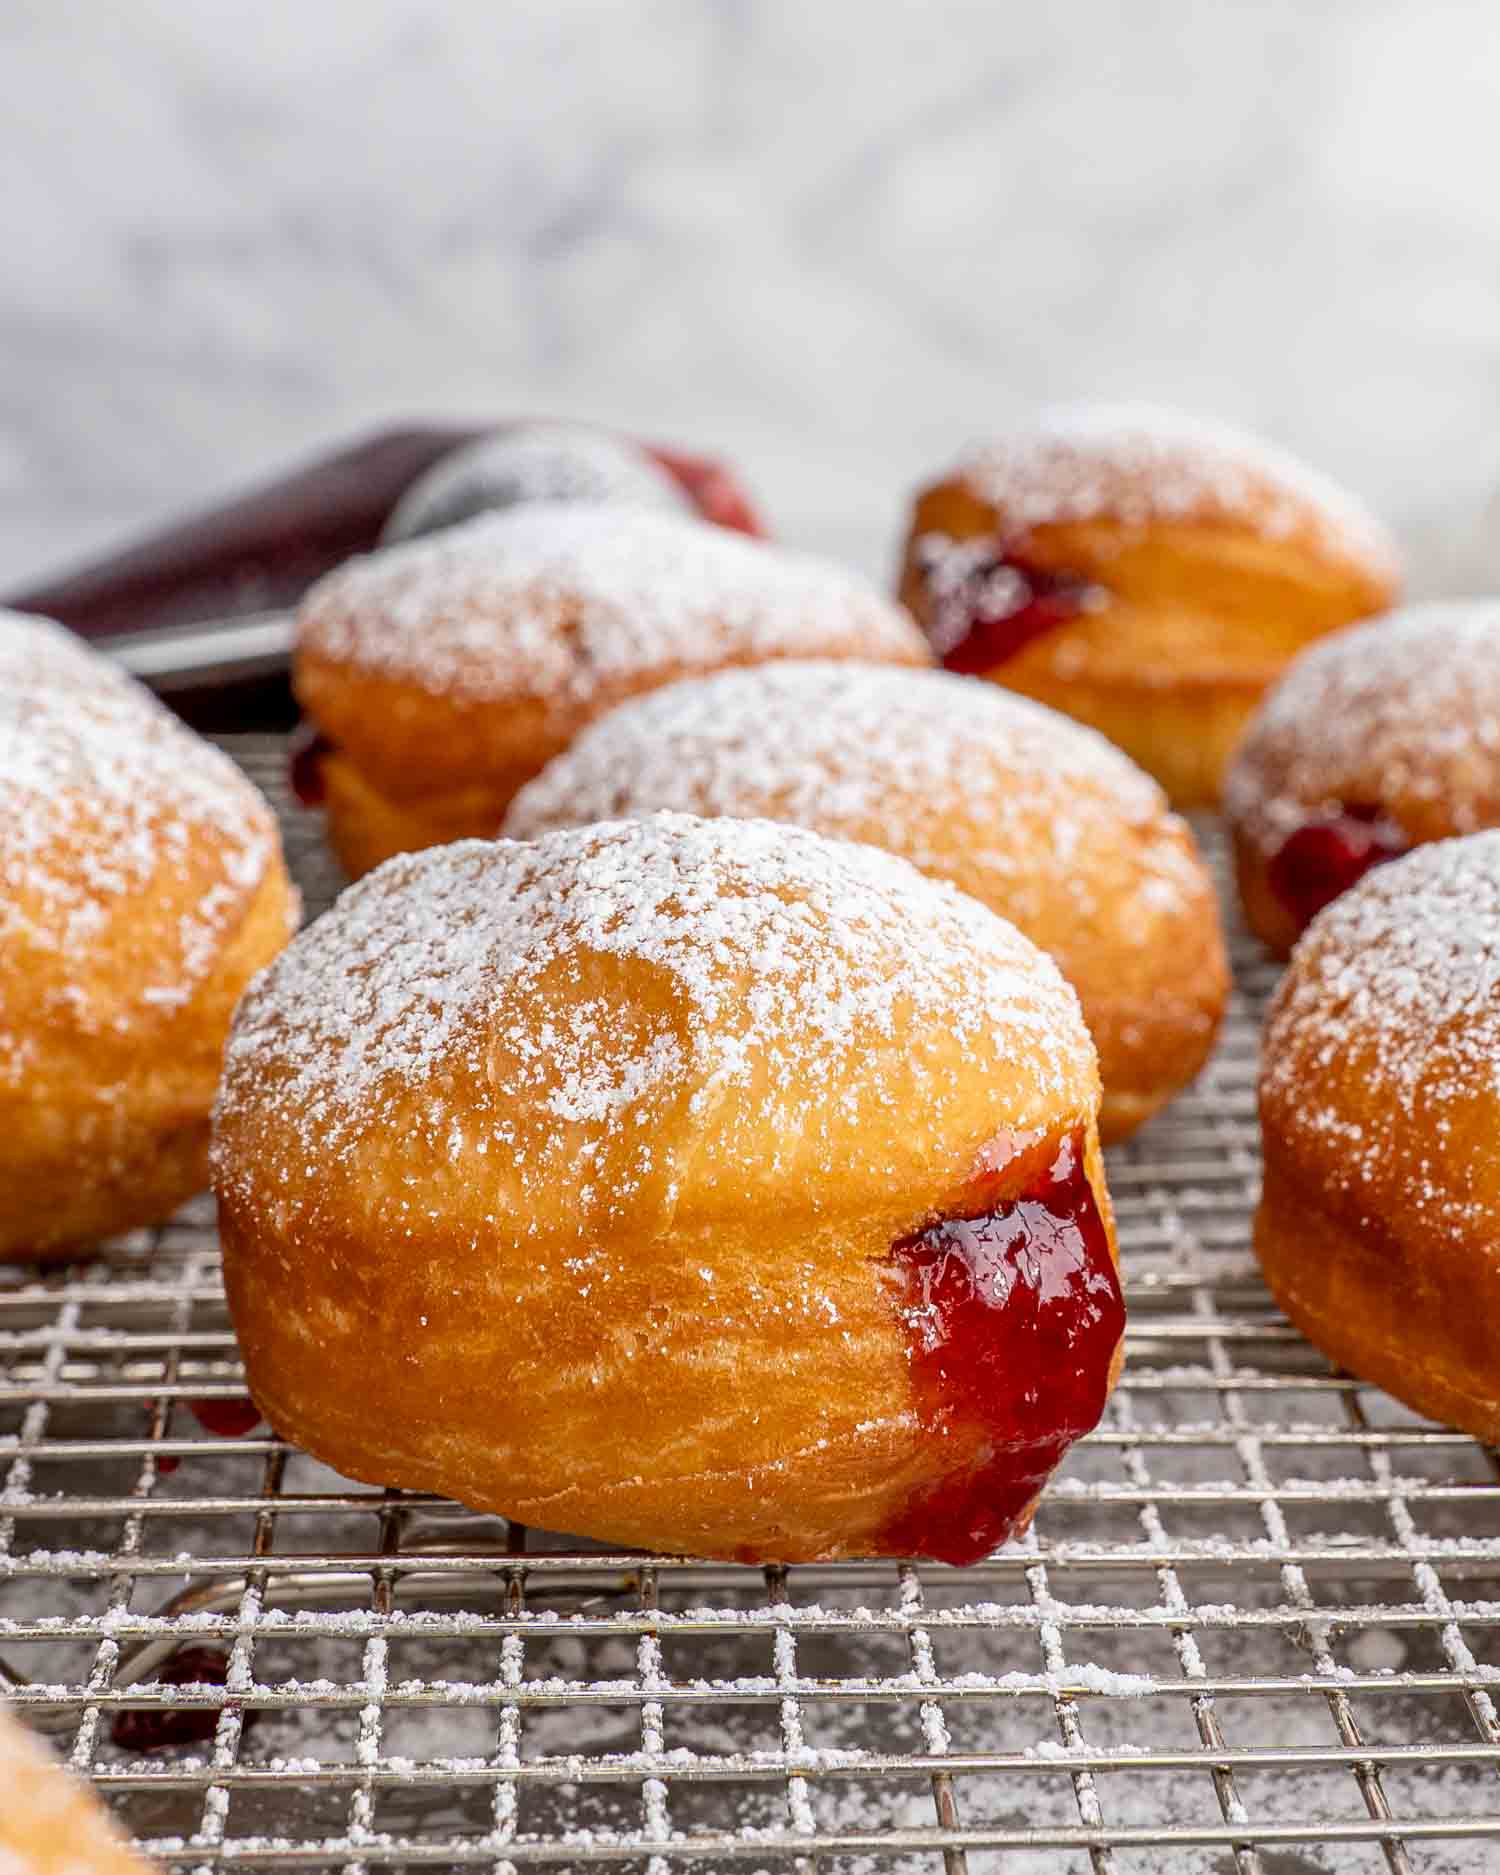 jelly donuts filled with cherry jelly on a cooling rack over a baking sheet.